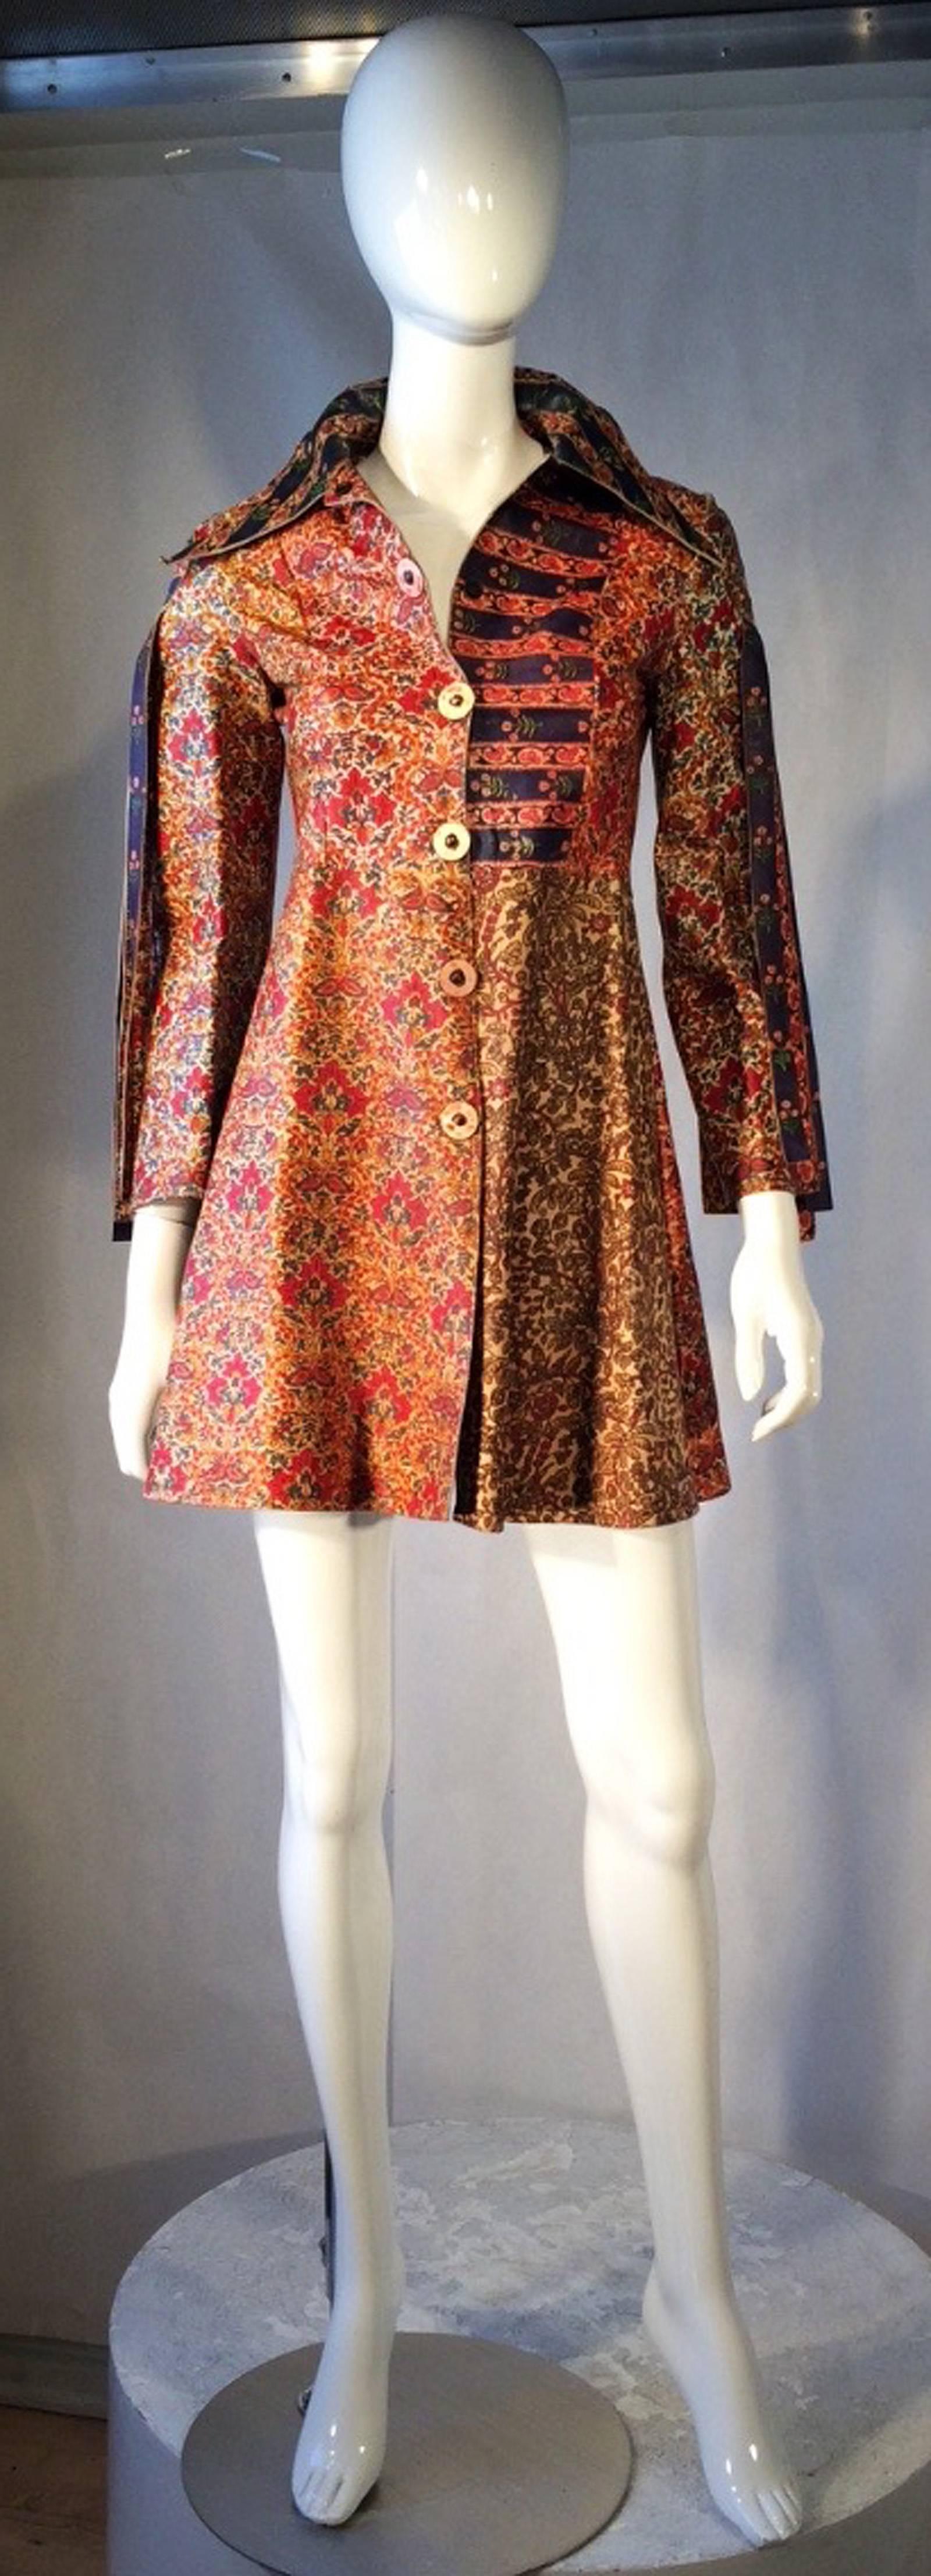 A fine and rare vintage Roberto Cavalli printed leather mini dress. Authentic hand decorated patchwork leather item features applique medallions at shoulder sides and back center. Medallions secure three (3) long matching fringes at each point. Item